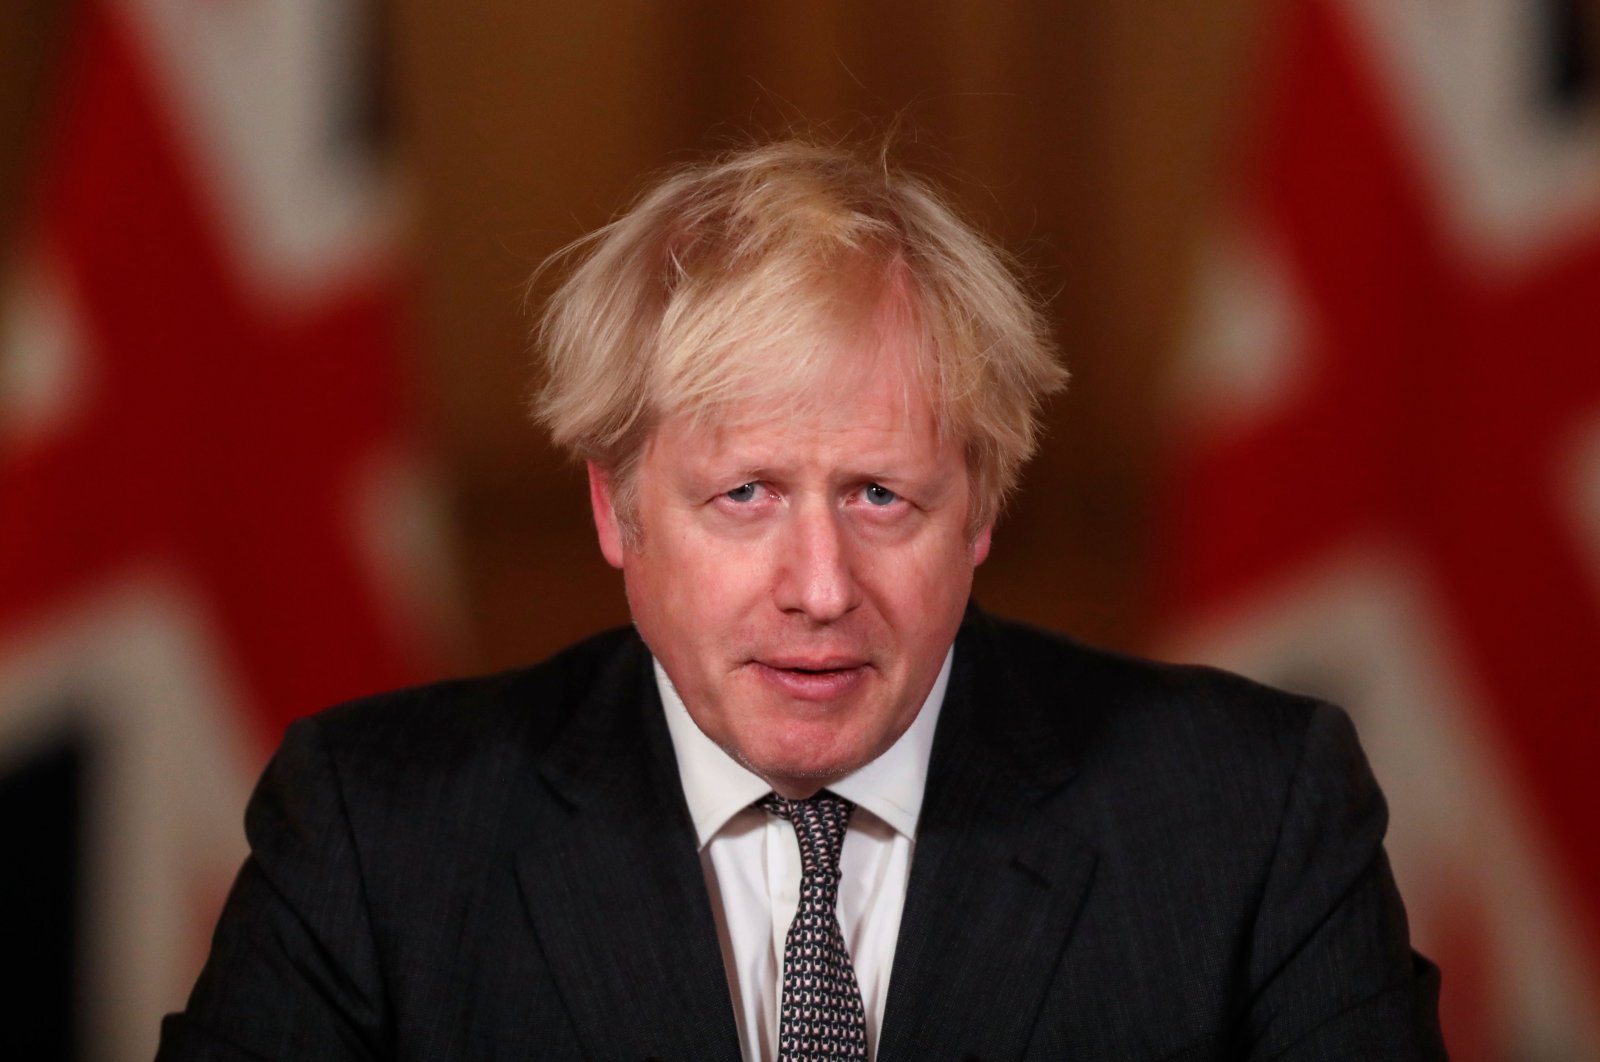 Britain's Prime Minister Boris Johnson speaks during a virtual press conference inside 10 Downing Street in central London on Dec. 30, 2020 (AFP Photo)